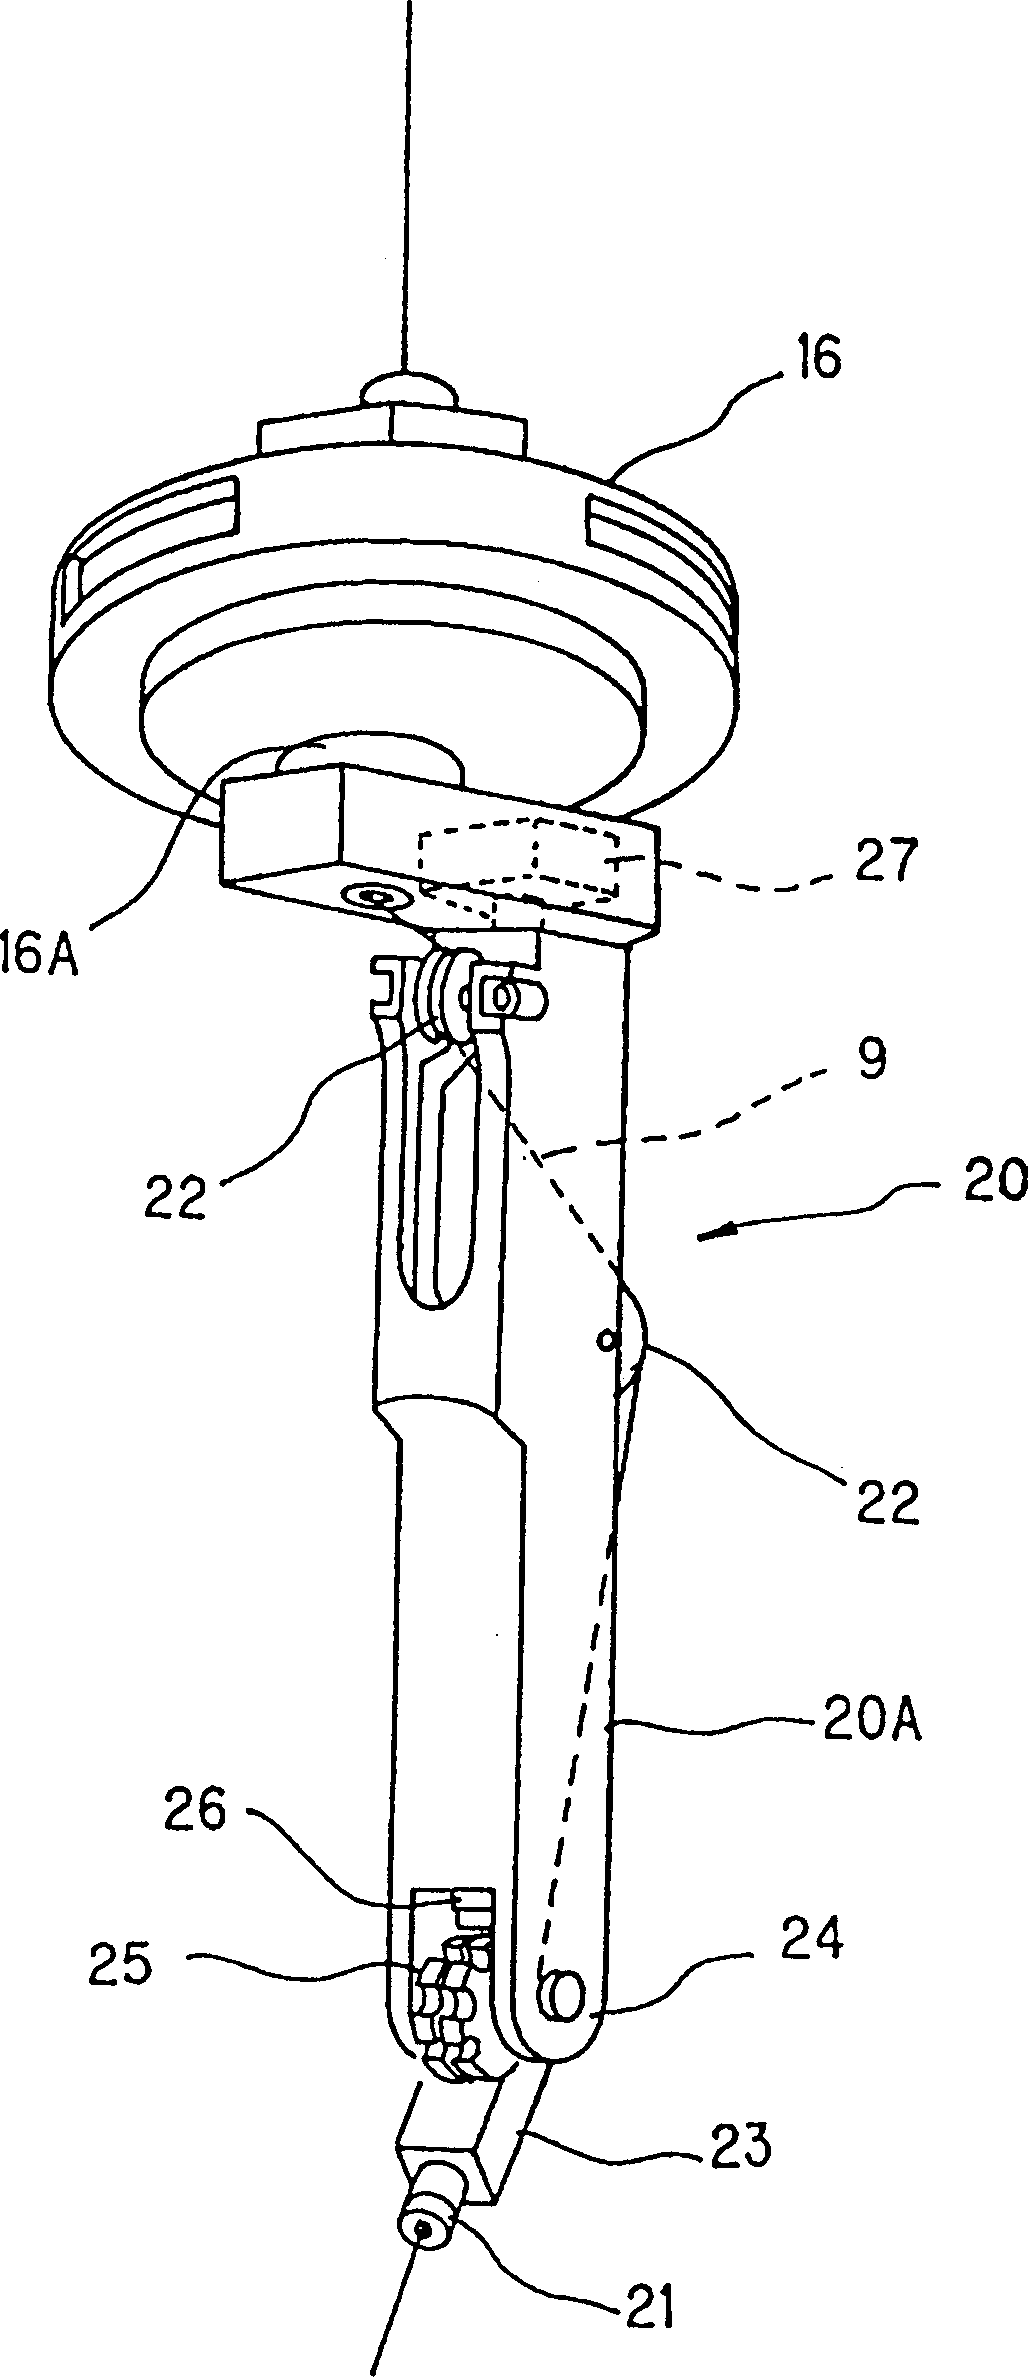 Coil winding device